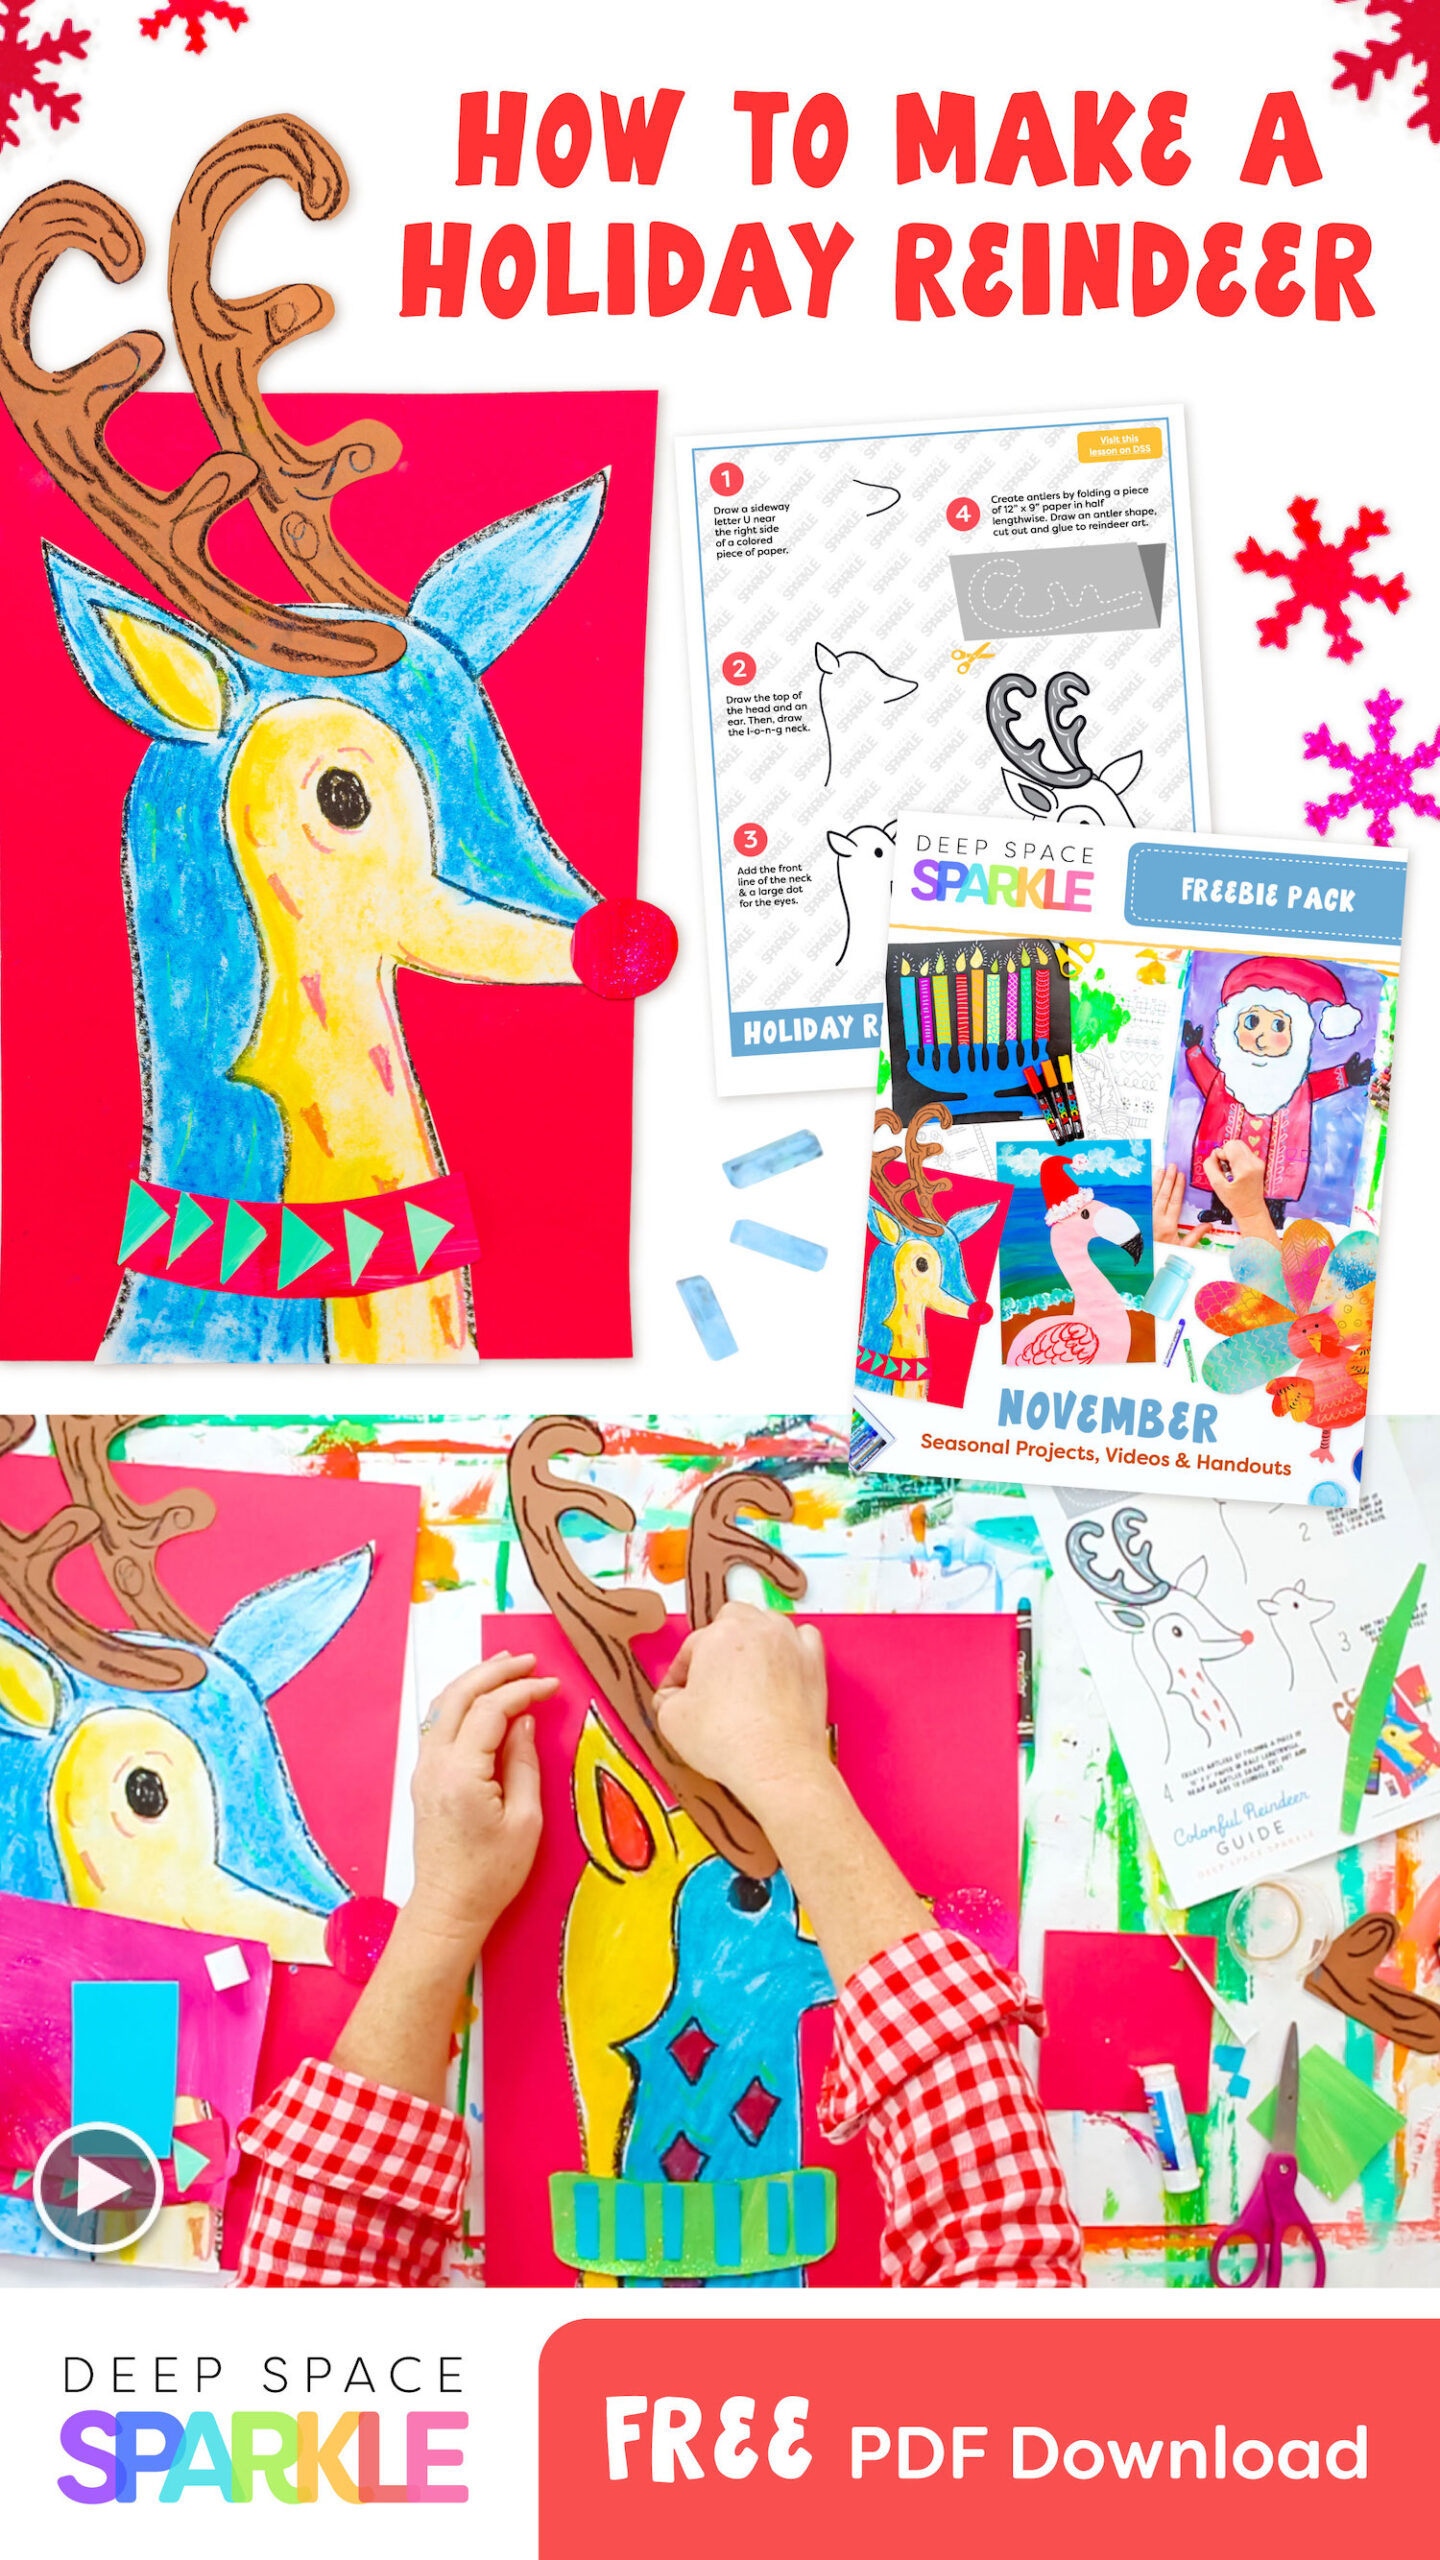 How to Make How to Make a Holiday Reindeer with free download packet guide to use with your students in the art room, templates and more!a Holiday Reindeer